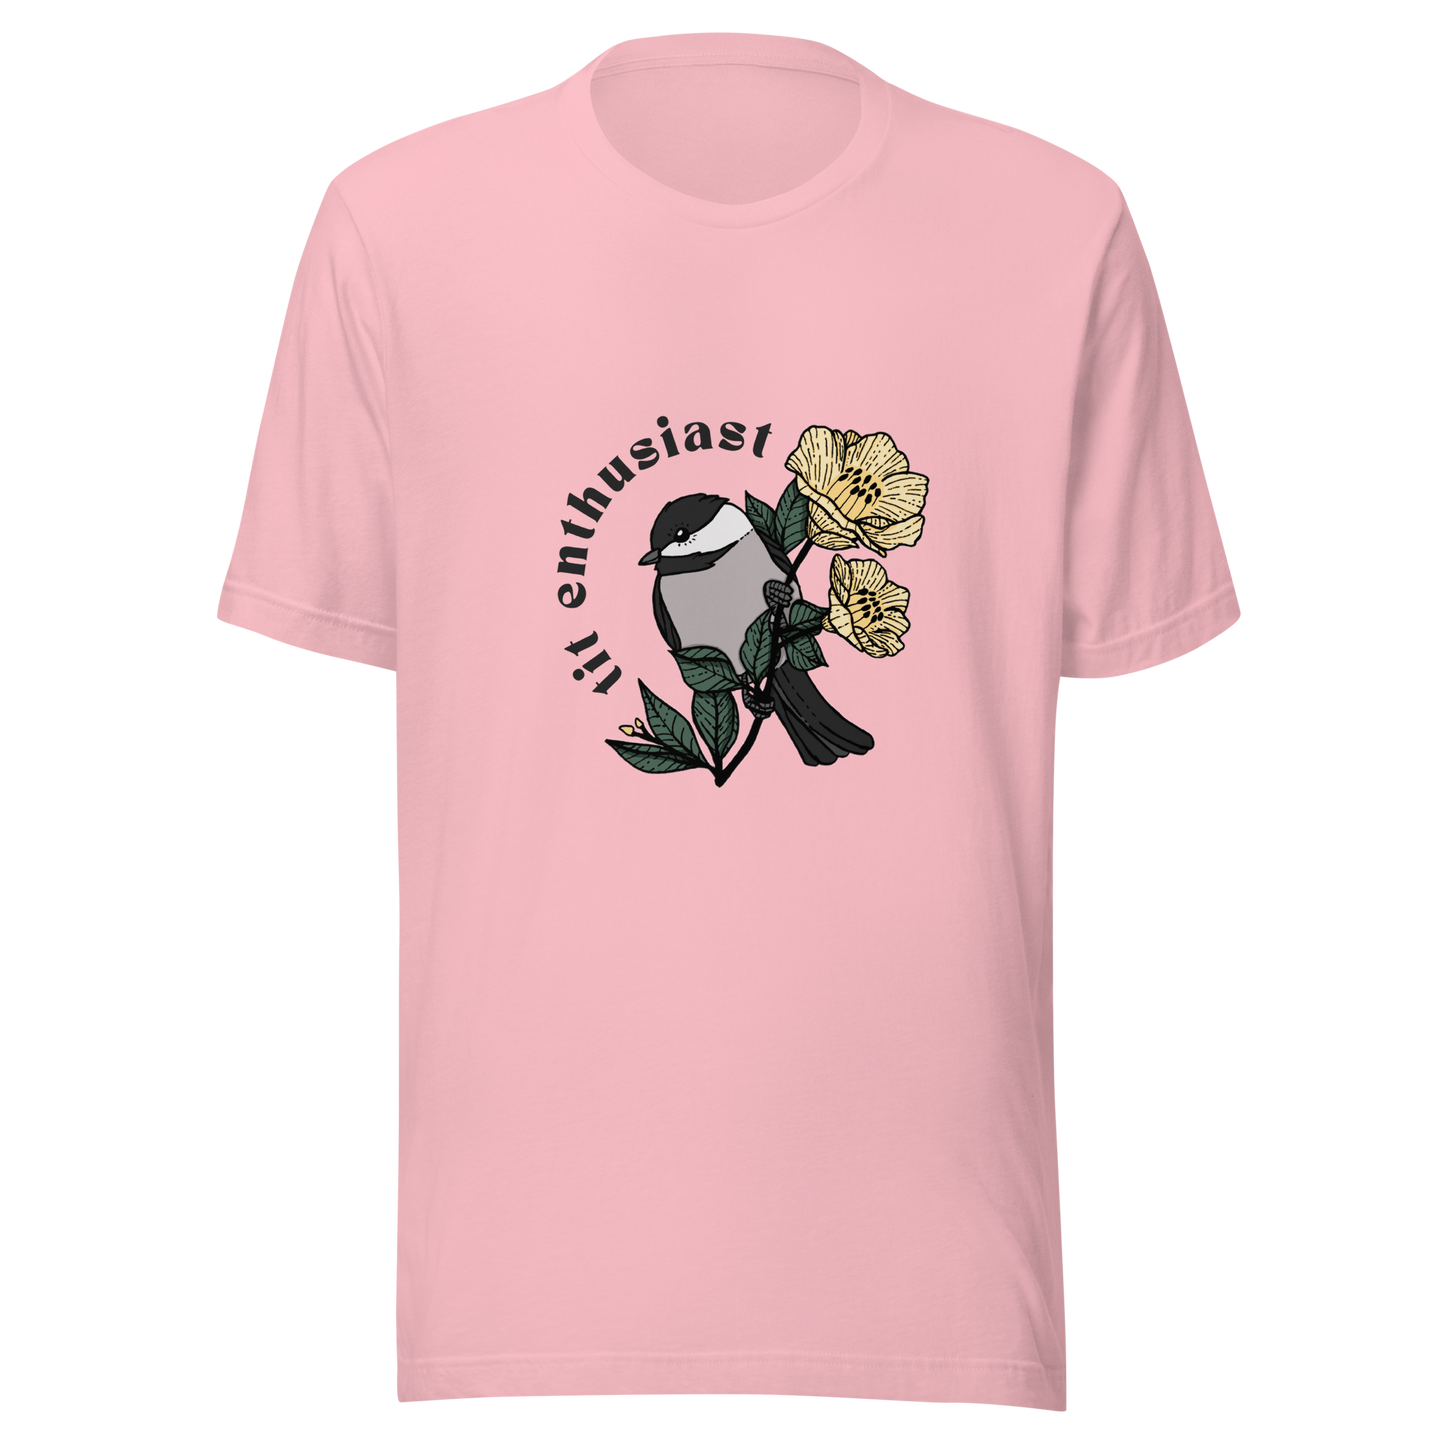 tit enthusiast t-shirt in pink - gaslit apparel